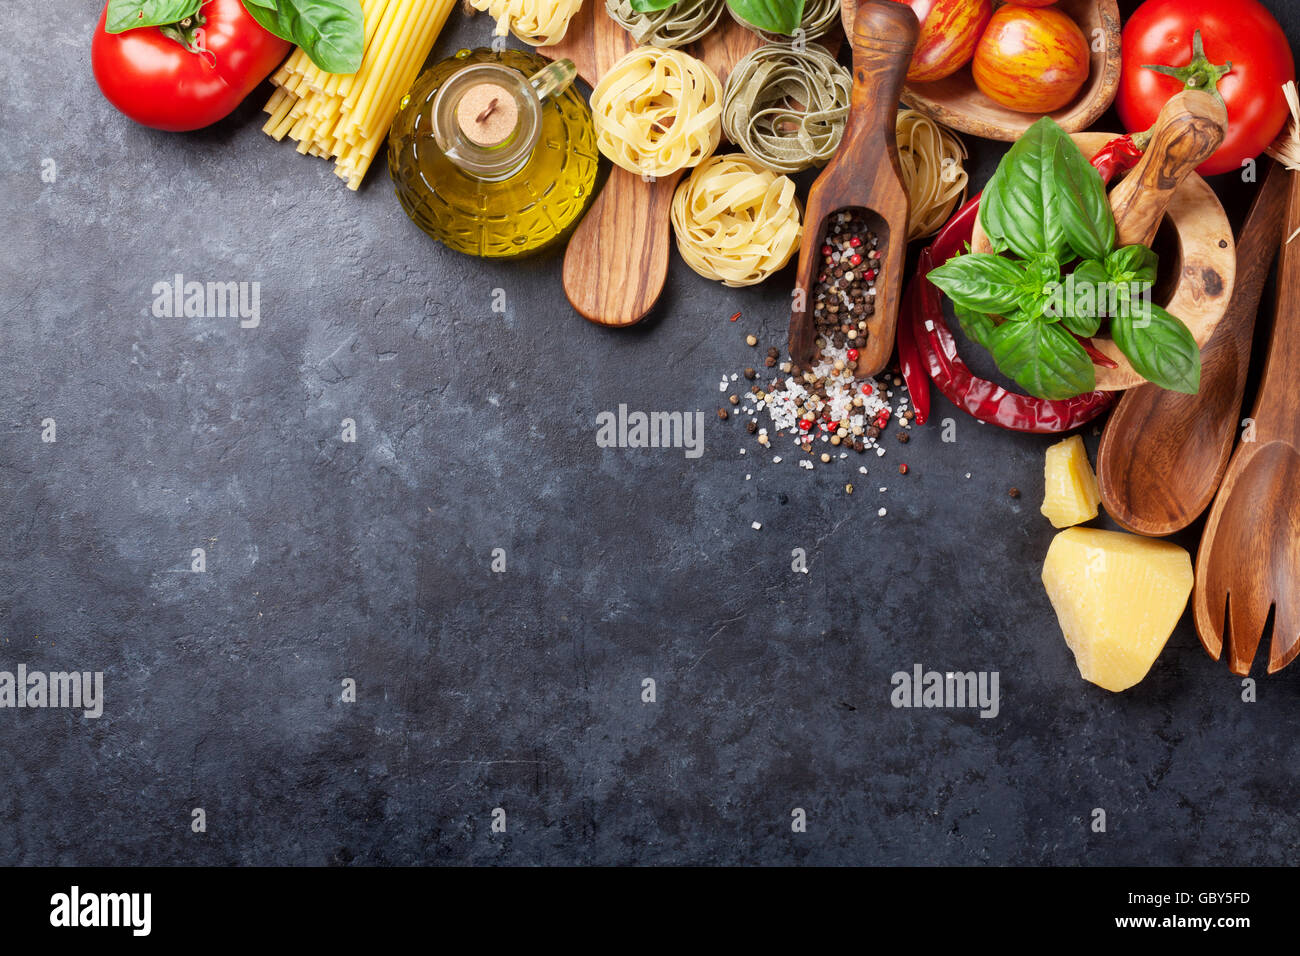 Italian food cooking. Tomatoes, basil, spaghetti pasta, olive oil and chili pepper on stone kitchen table. Top view with copy sp Stock Photo